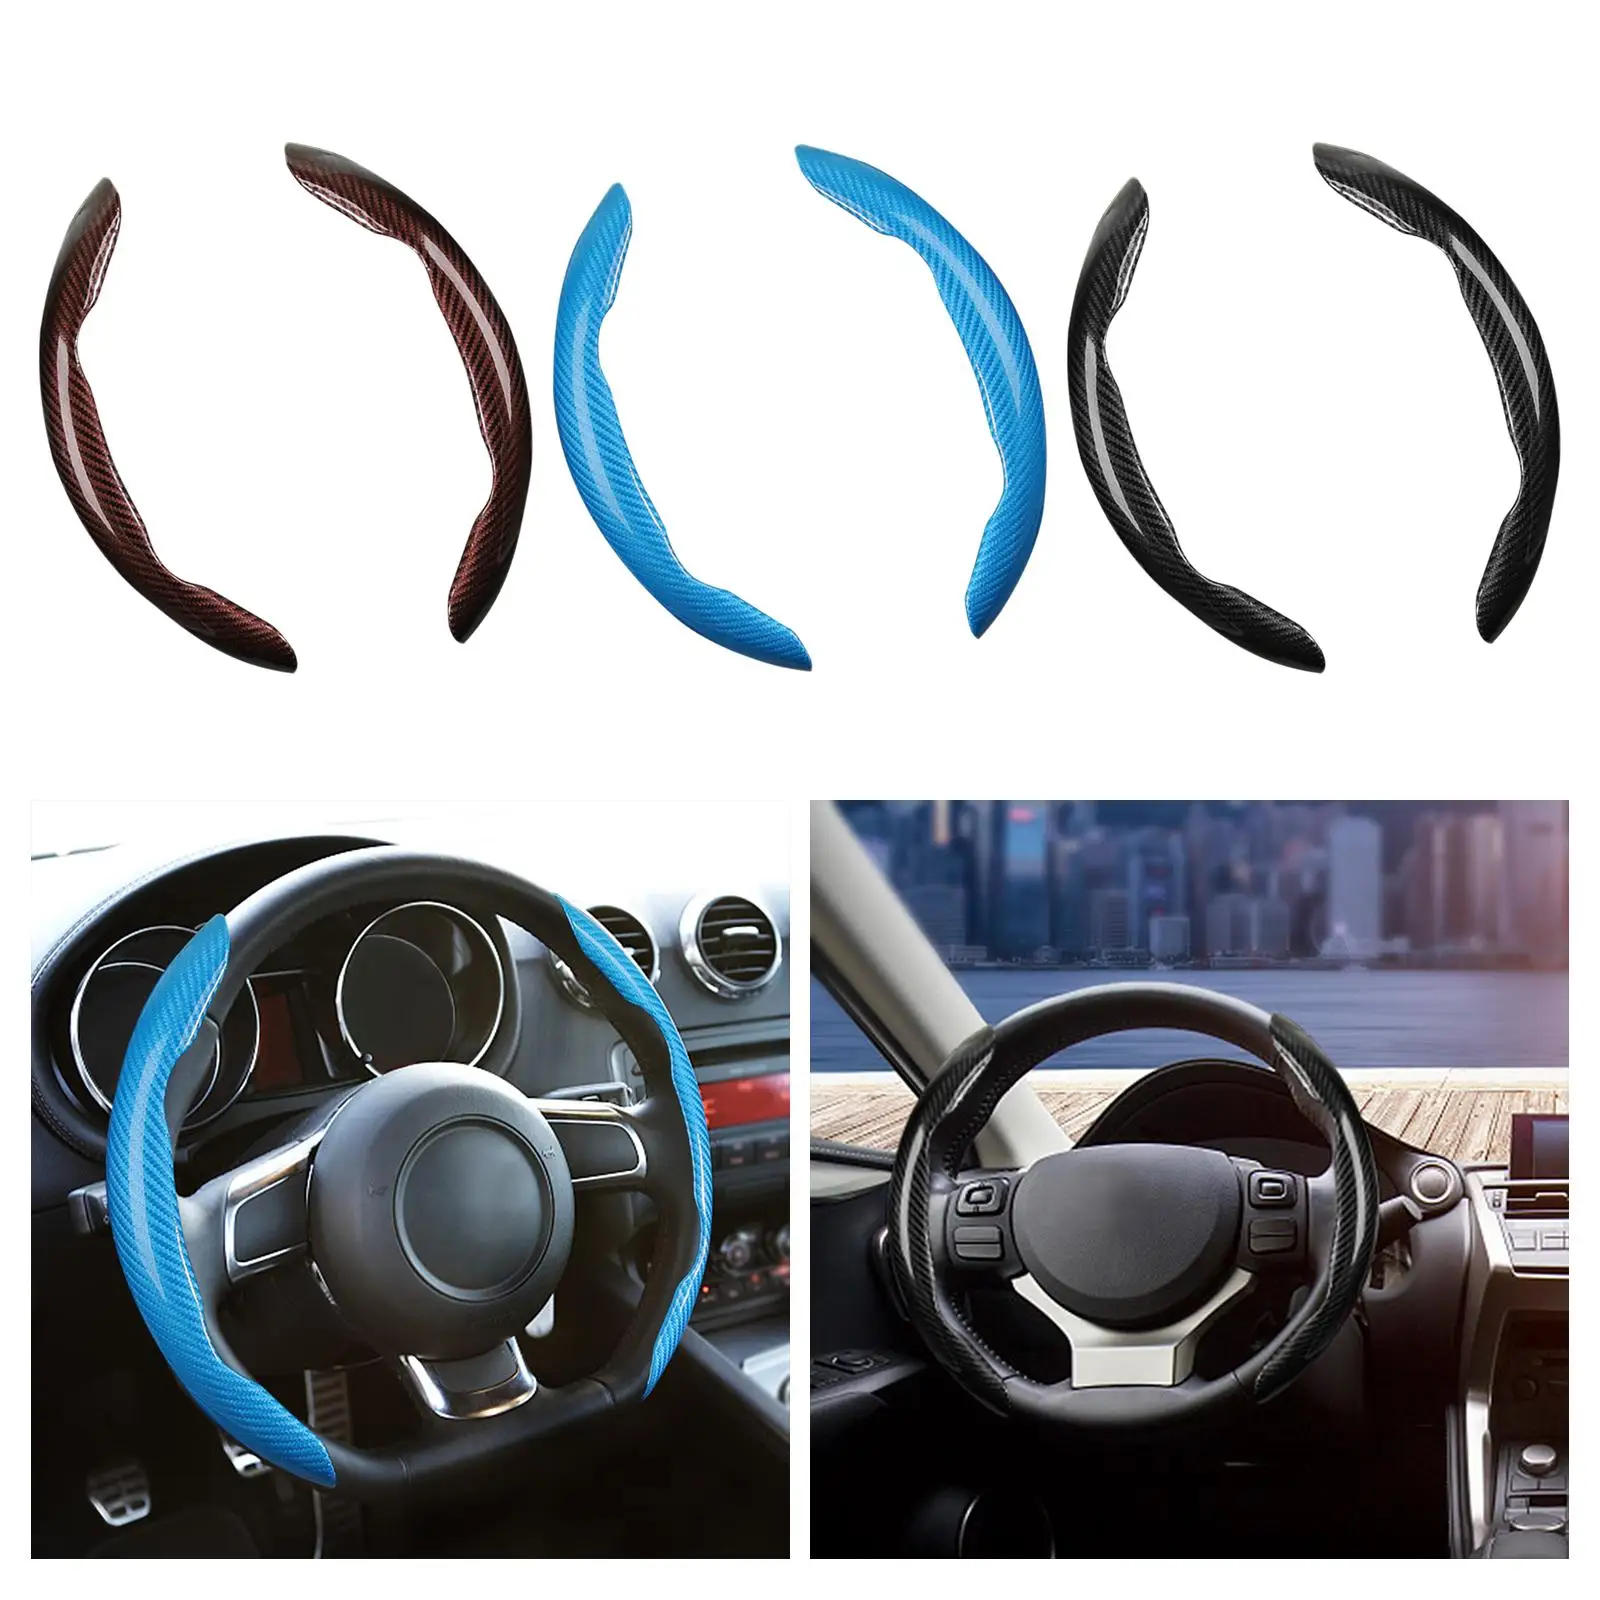 2x Carbon Fiber Steering Wheel Cover Protector Universal Fit 38cm Accessory